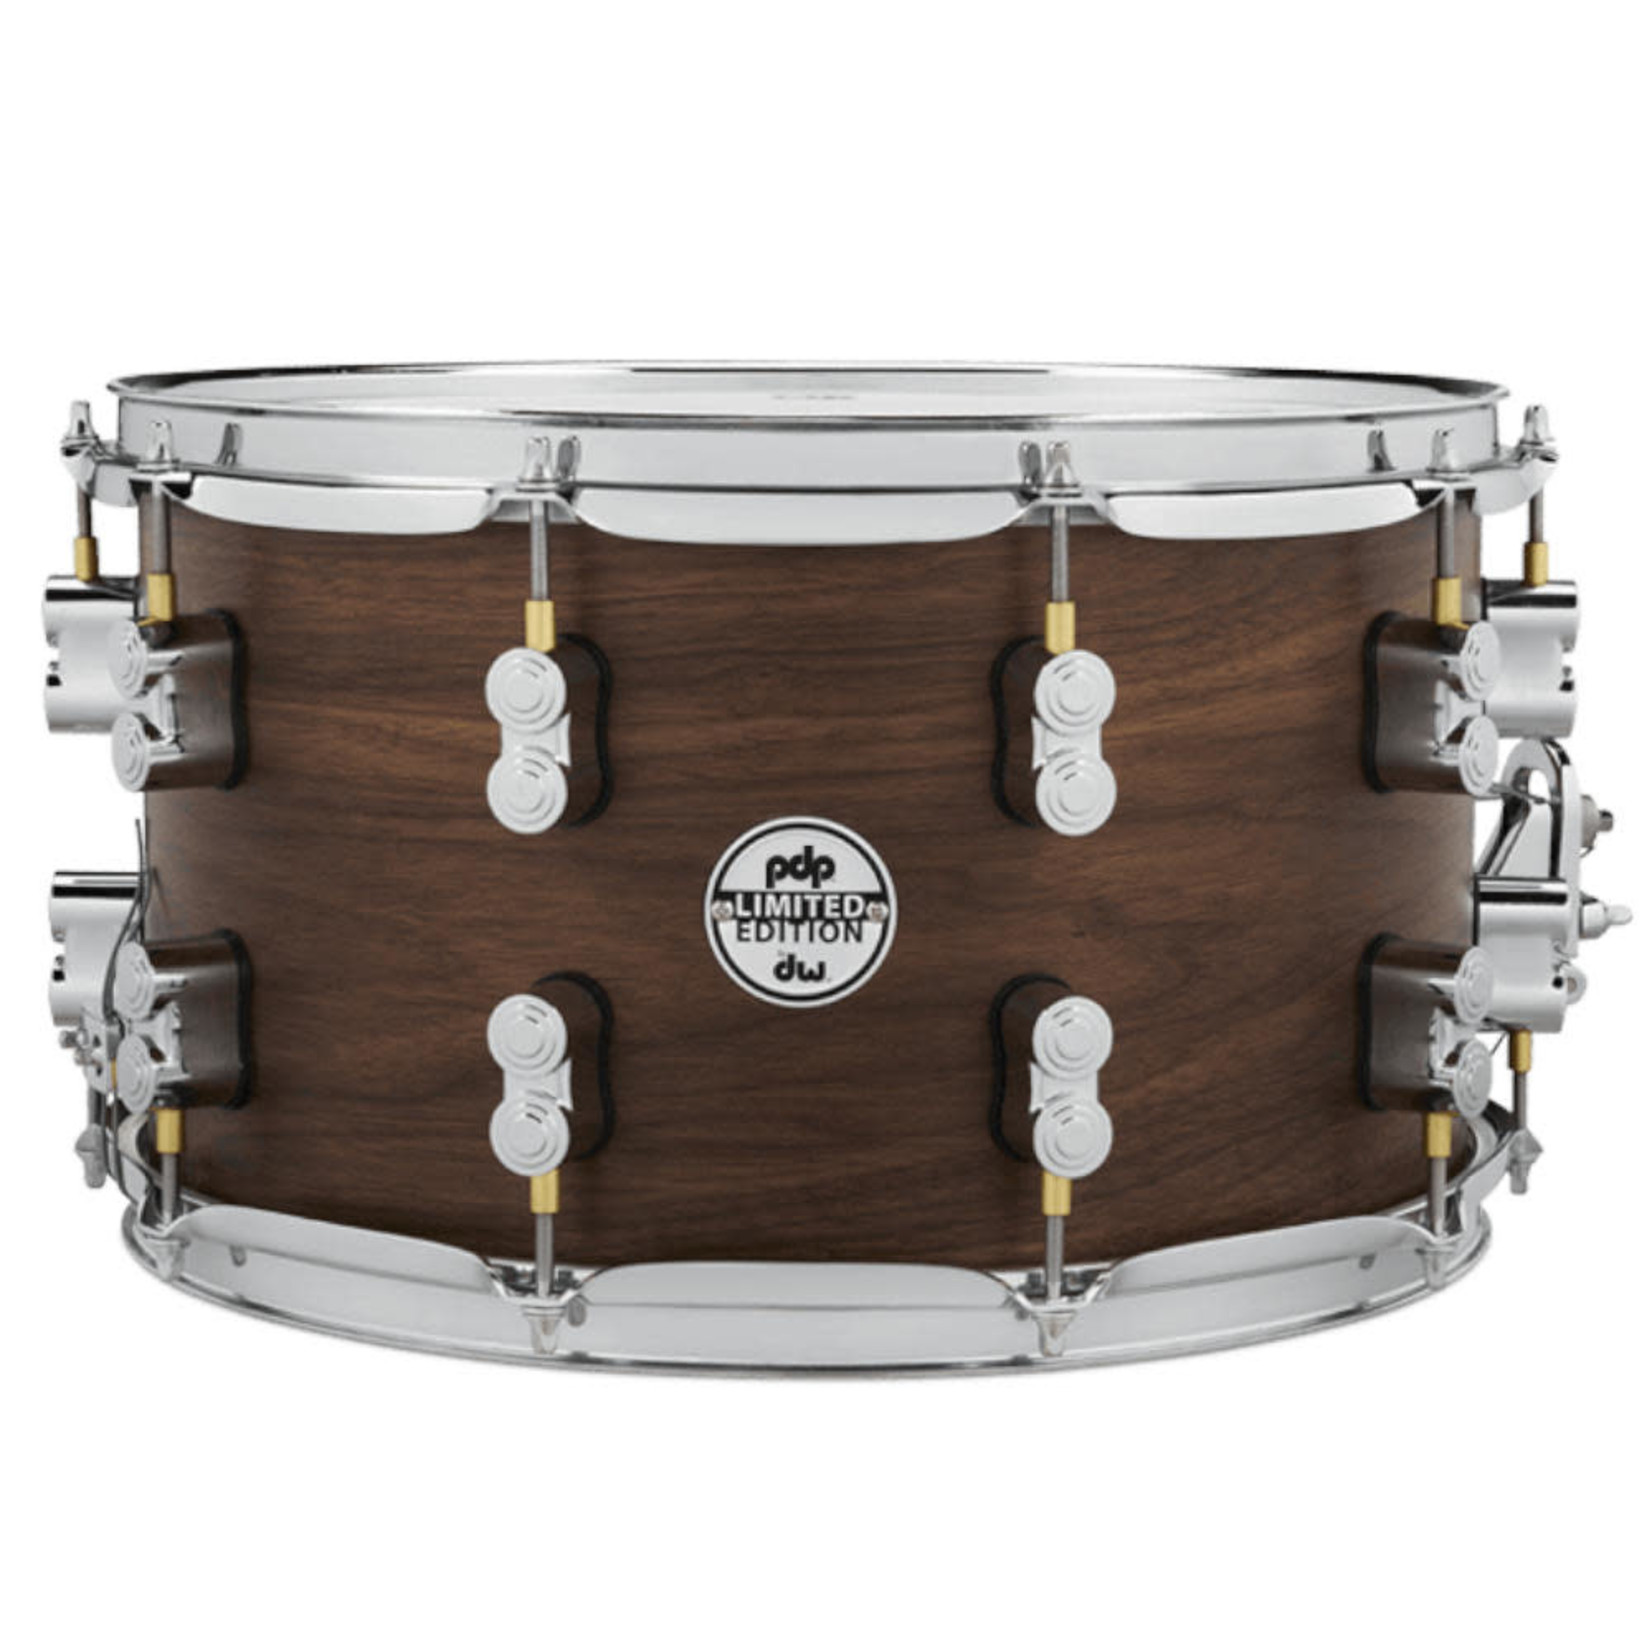 PDP PDP Concept Series Limited Edition 8X14” 20-Ply Hybrid Walnut/Maple Snare Drum PDSN0814MWNS